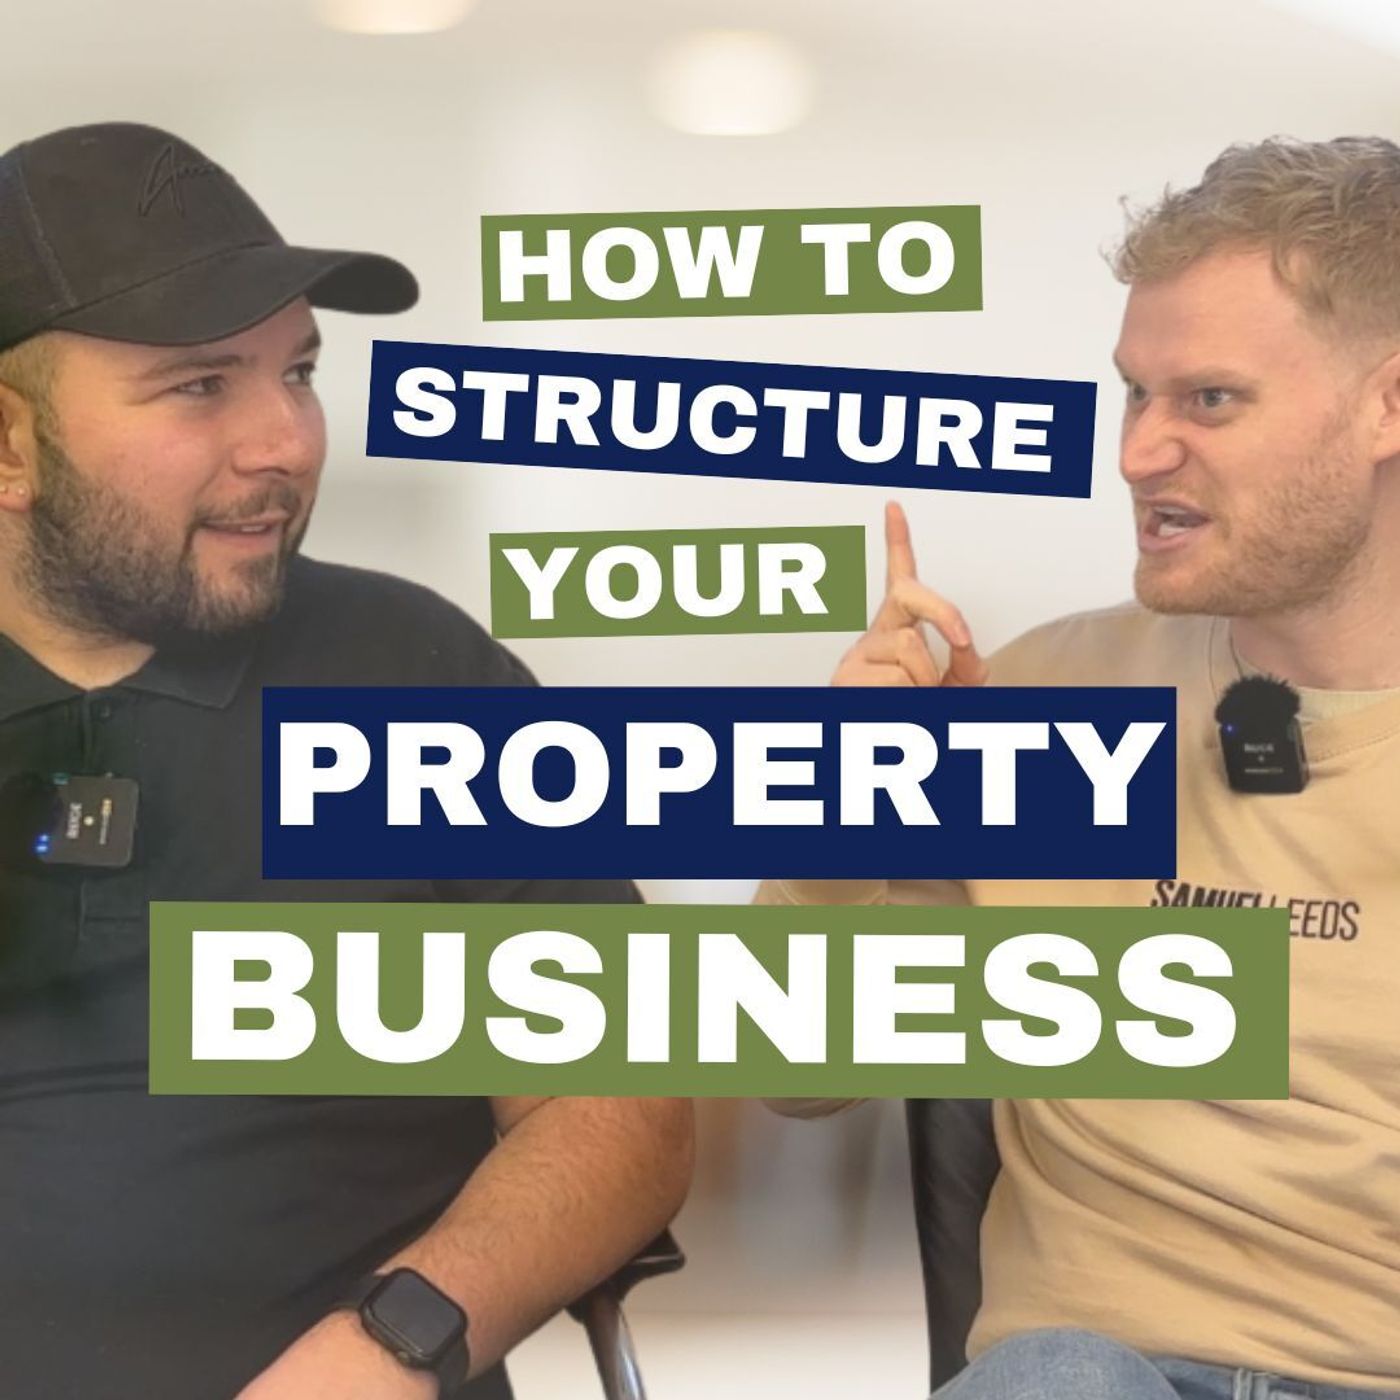 27: The BEST Way to Structure Your Property Business